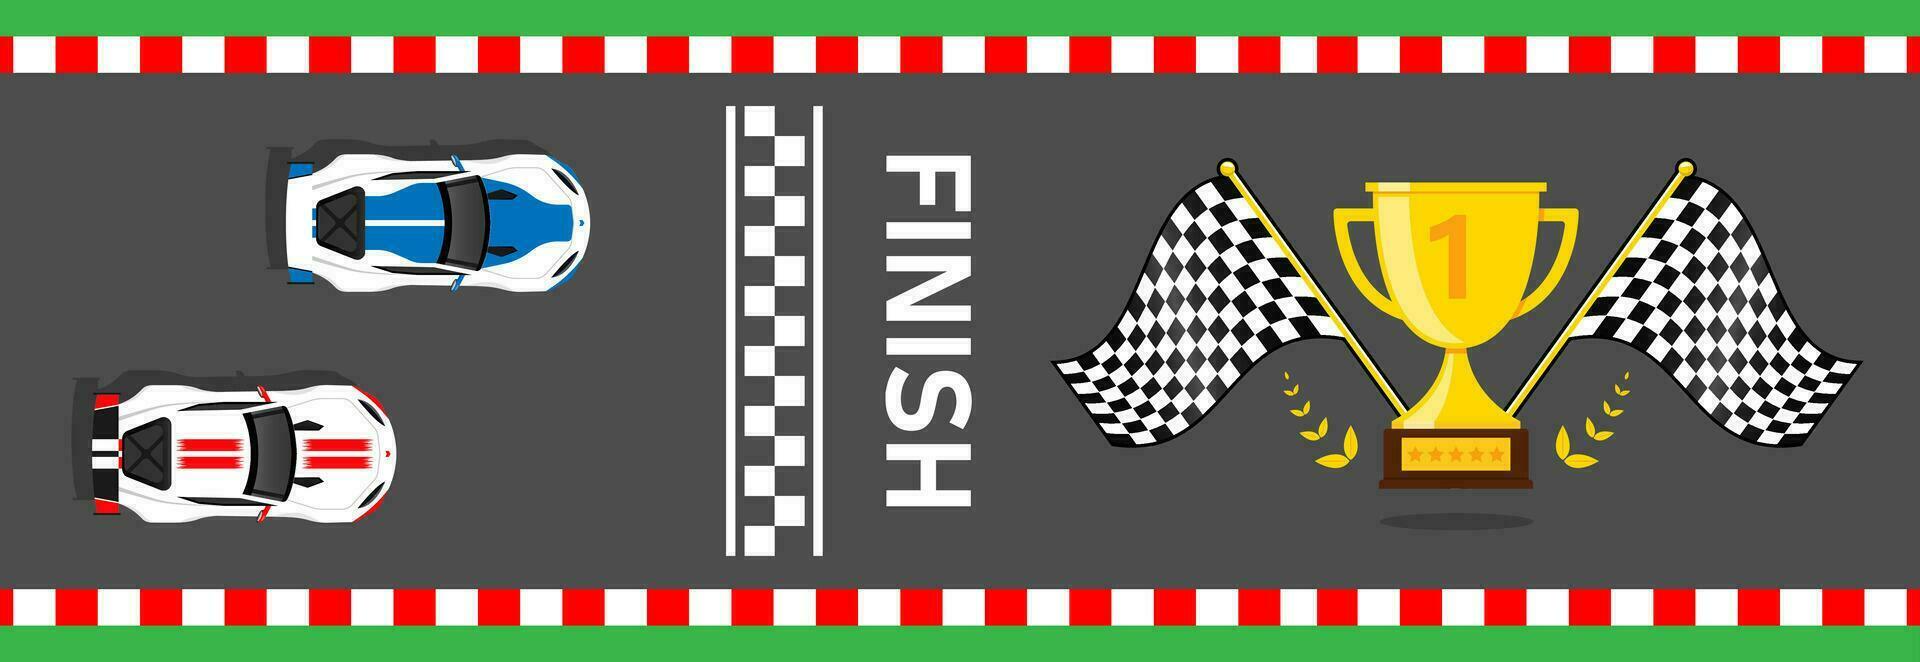 Racing cars at finish line trophy win racing flags wave vector